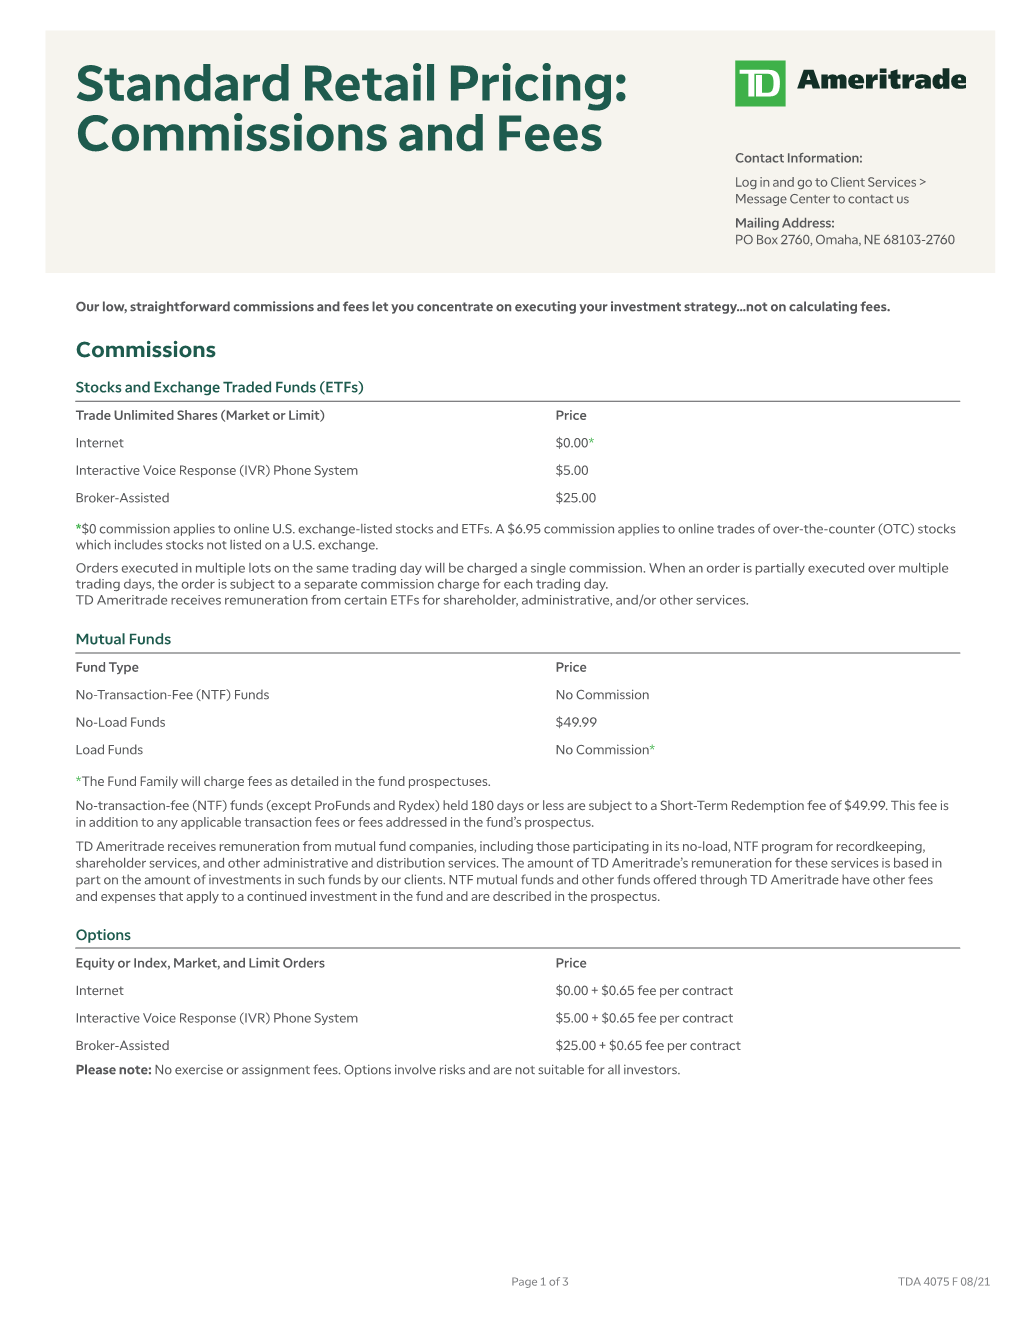 Standard Retail Pricing Commissions Fees-TDA 0821